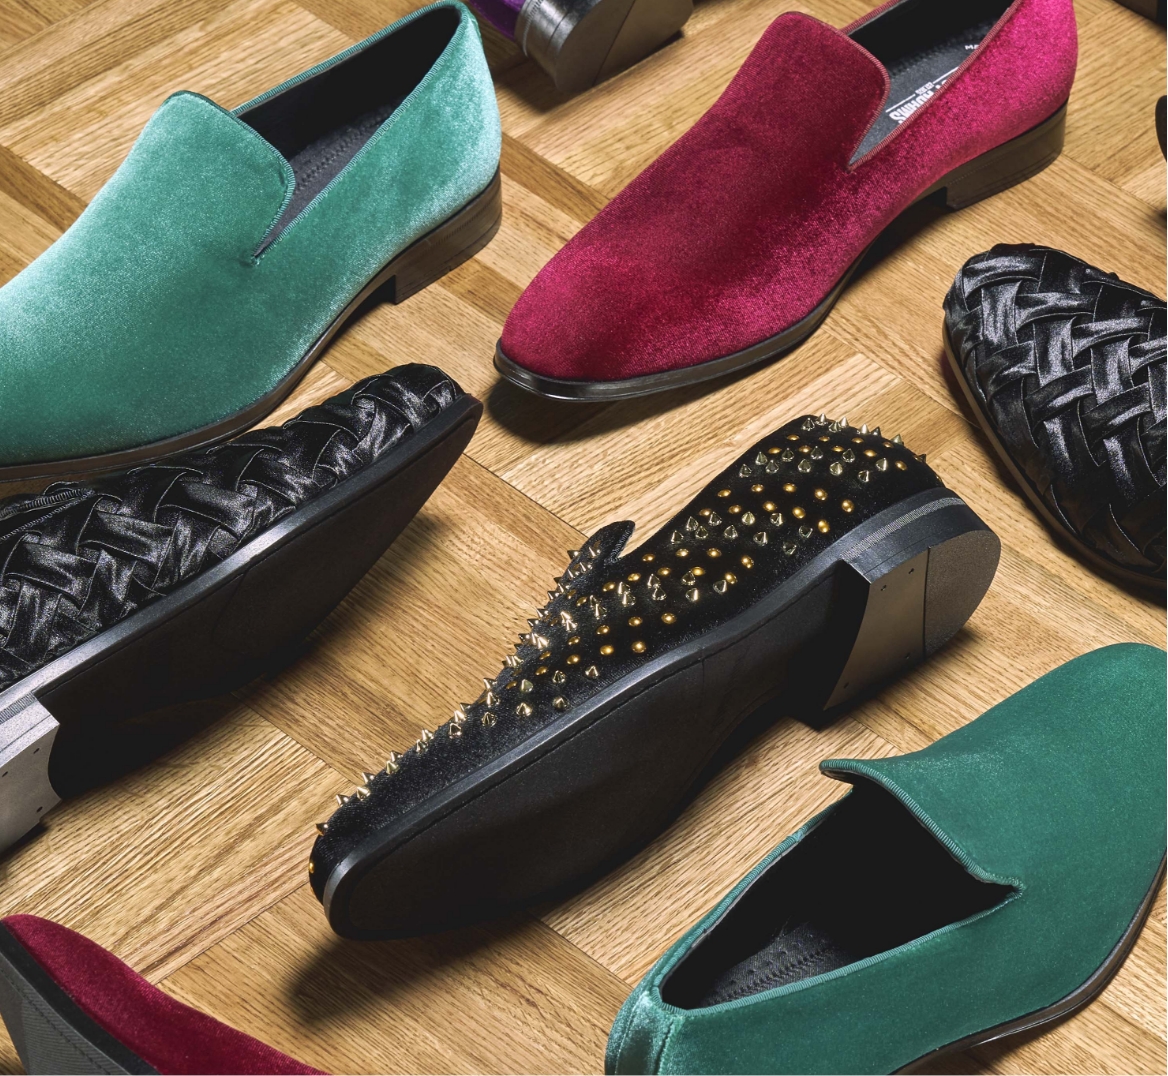 Click to shop Stacy Adams fashion styles. Image features a variety of smoking slippers.